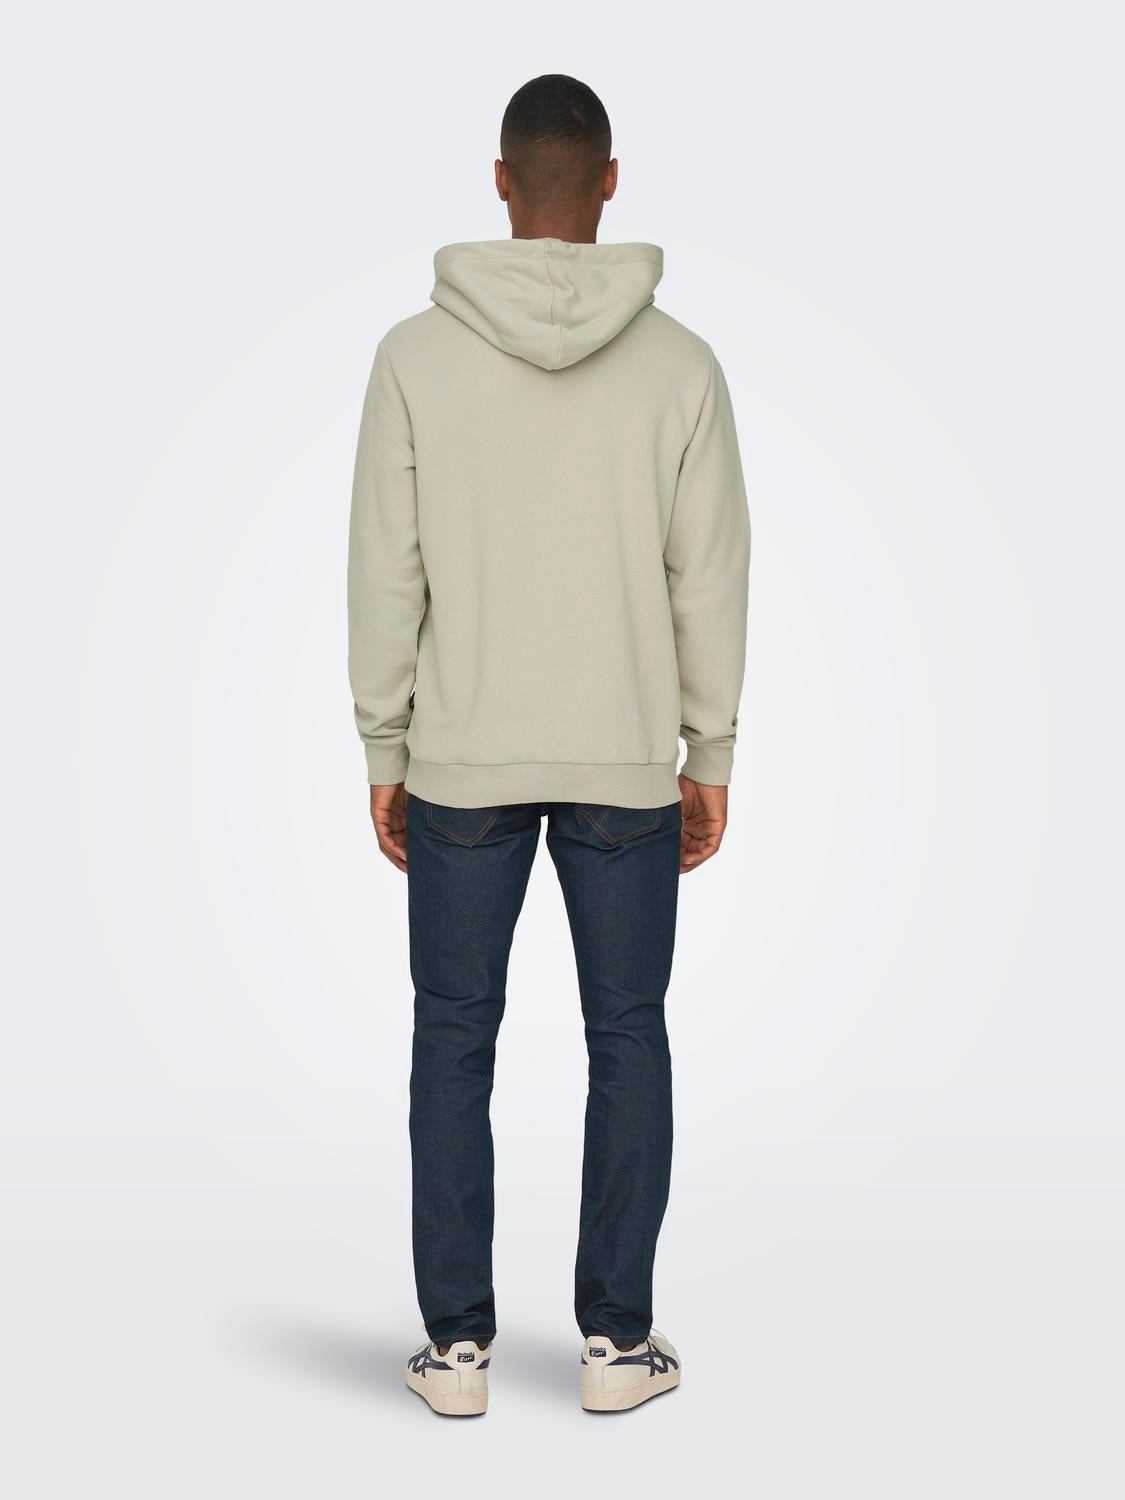 ONLY & SONS Normal passform Hoodie Sweatshirt -Silver Lining - 22018685